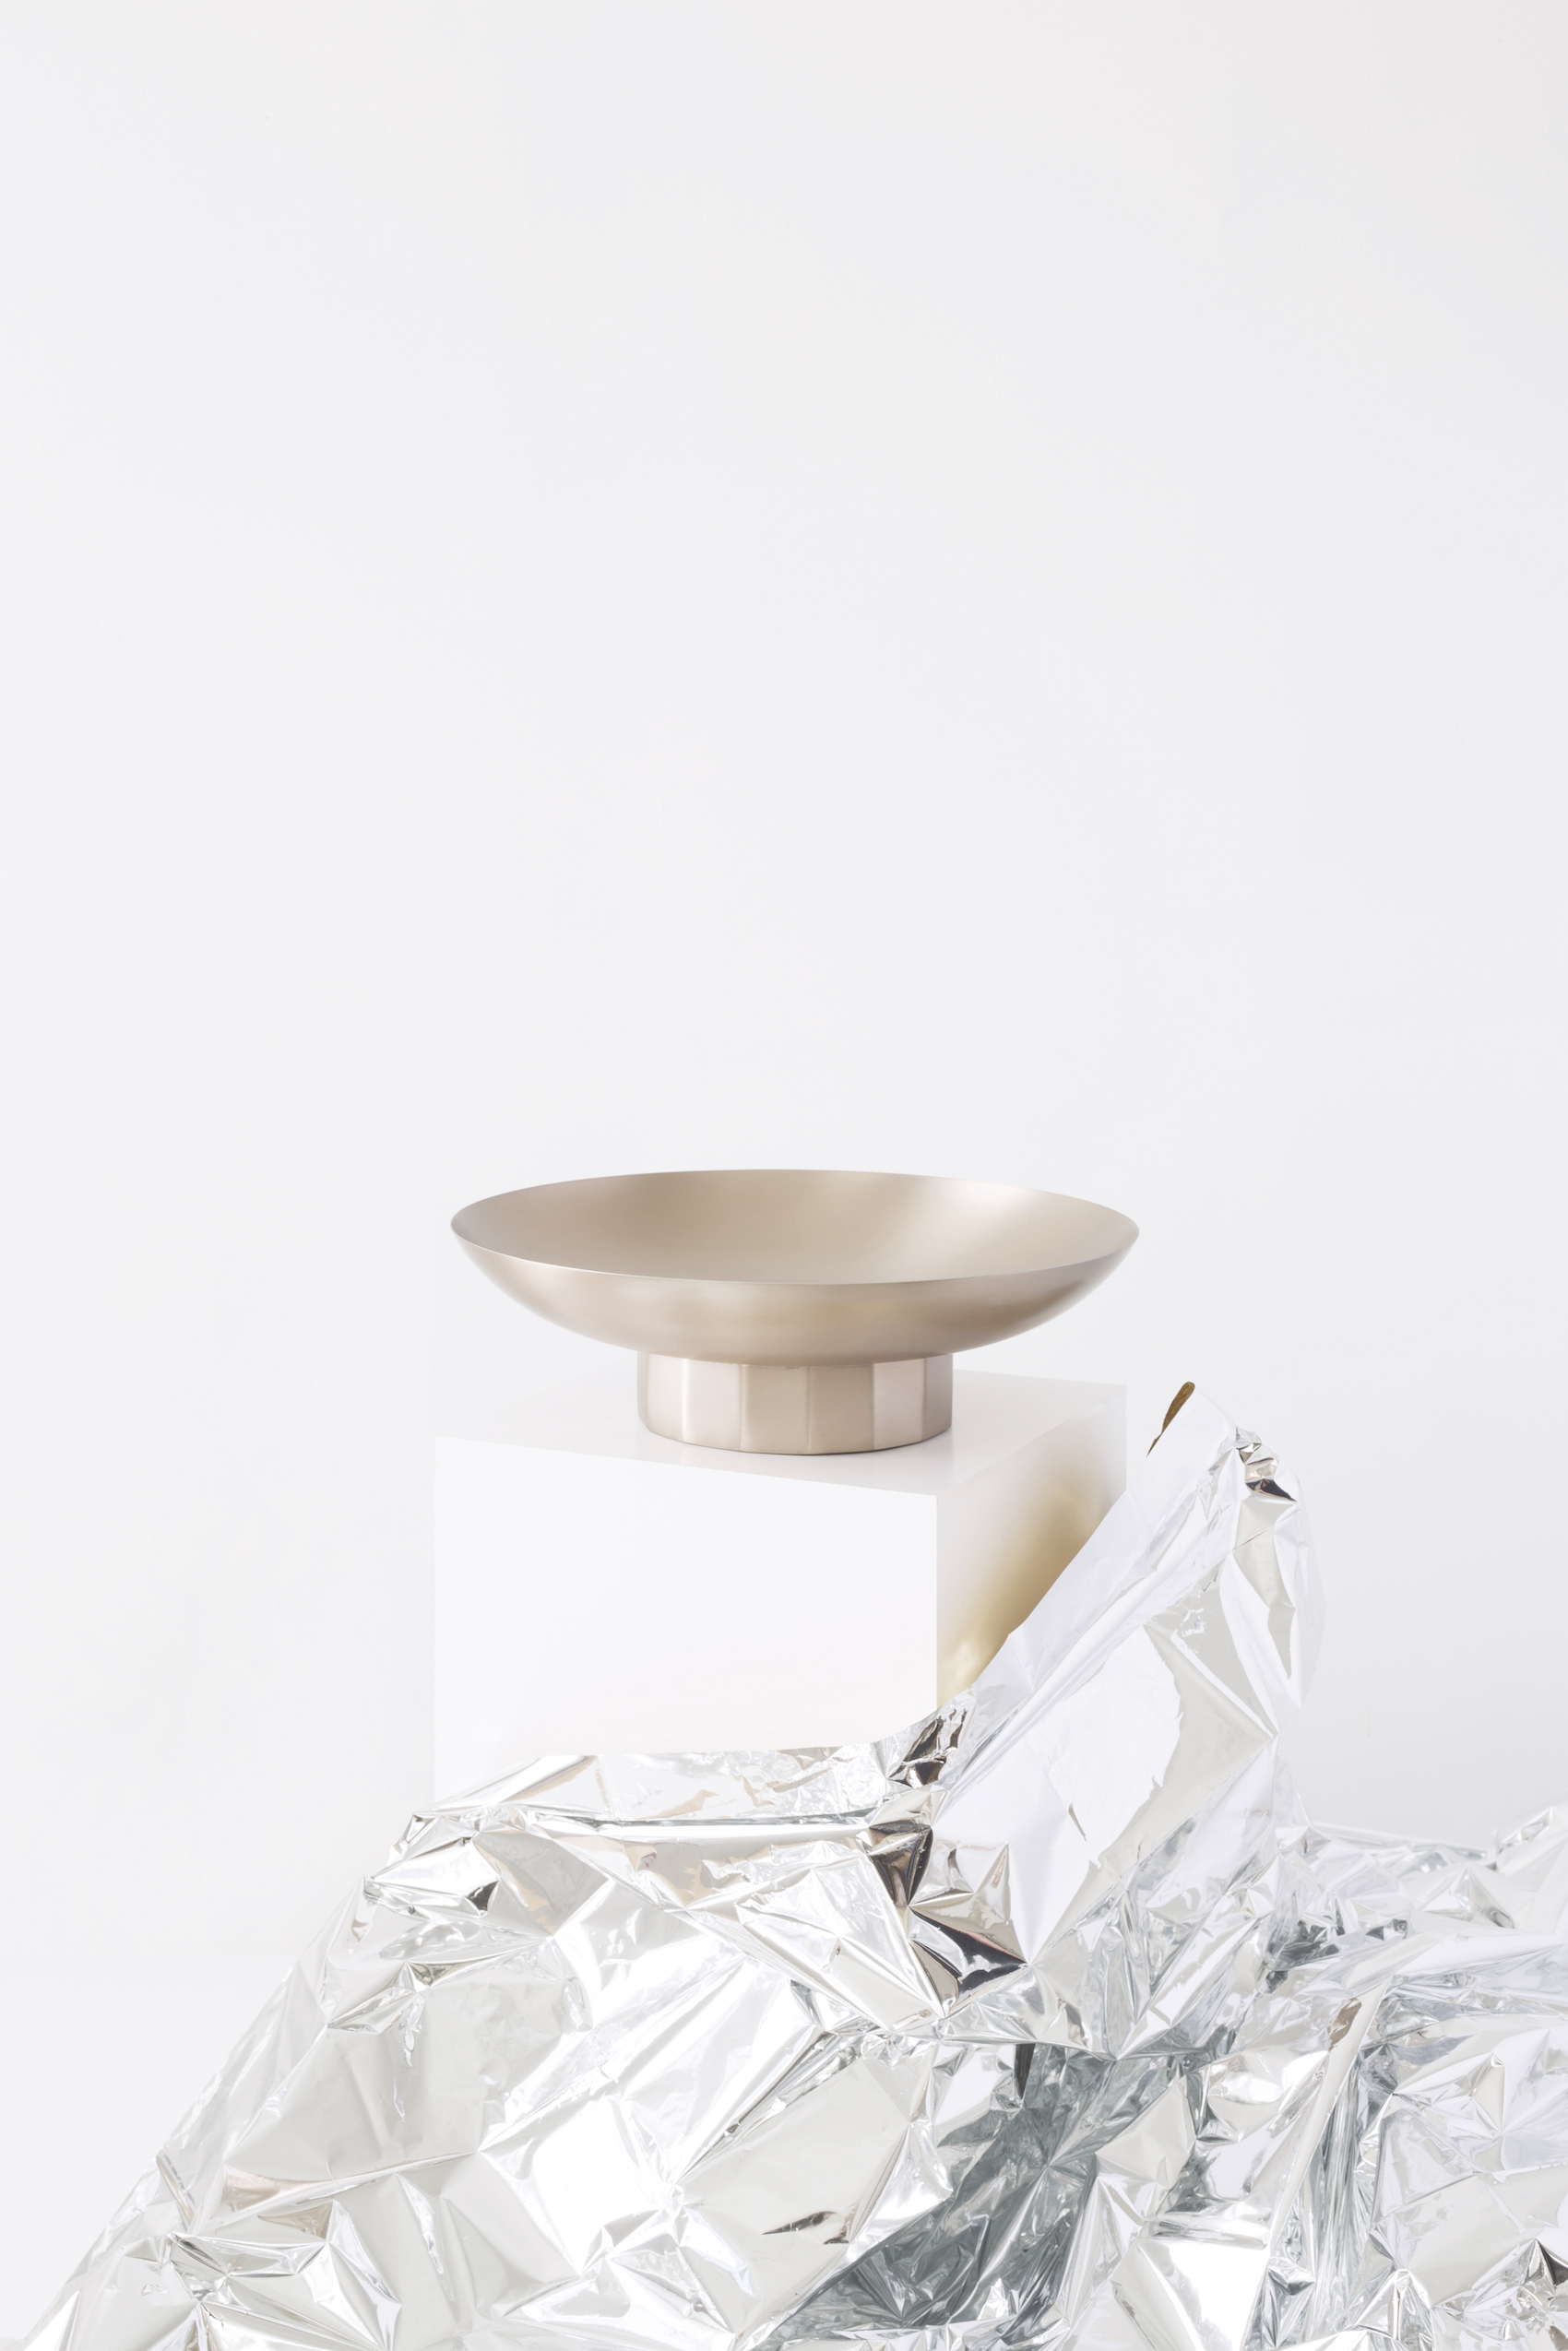 Minimalist Collection of Accessories "Doric" by PaulinePlusLuis